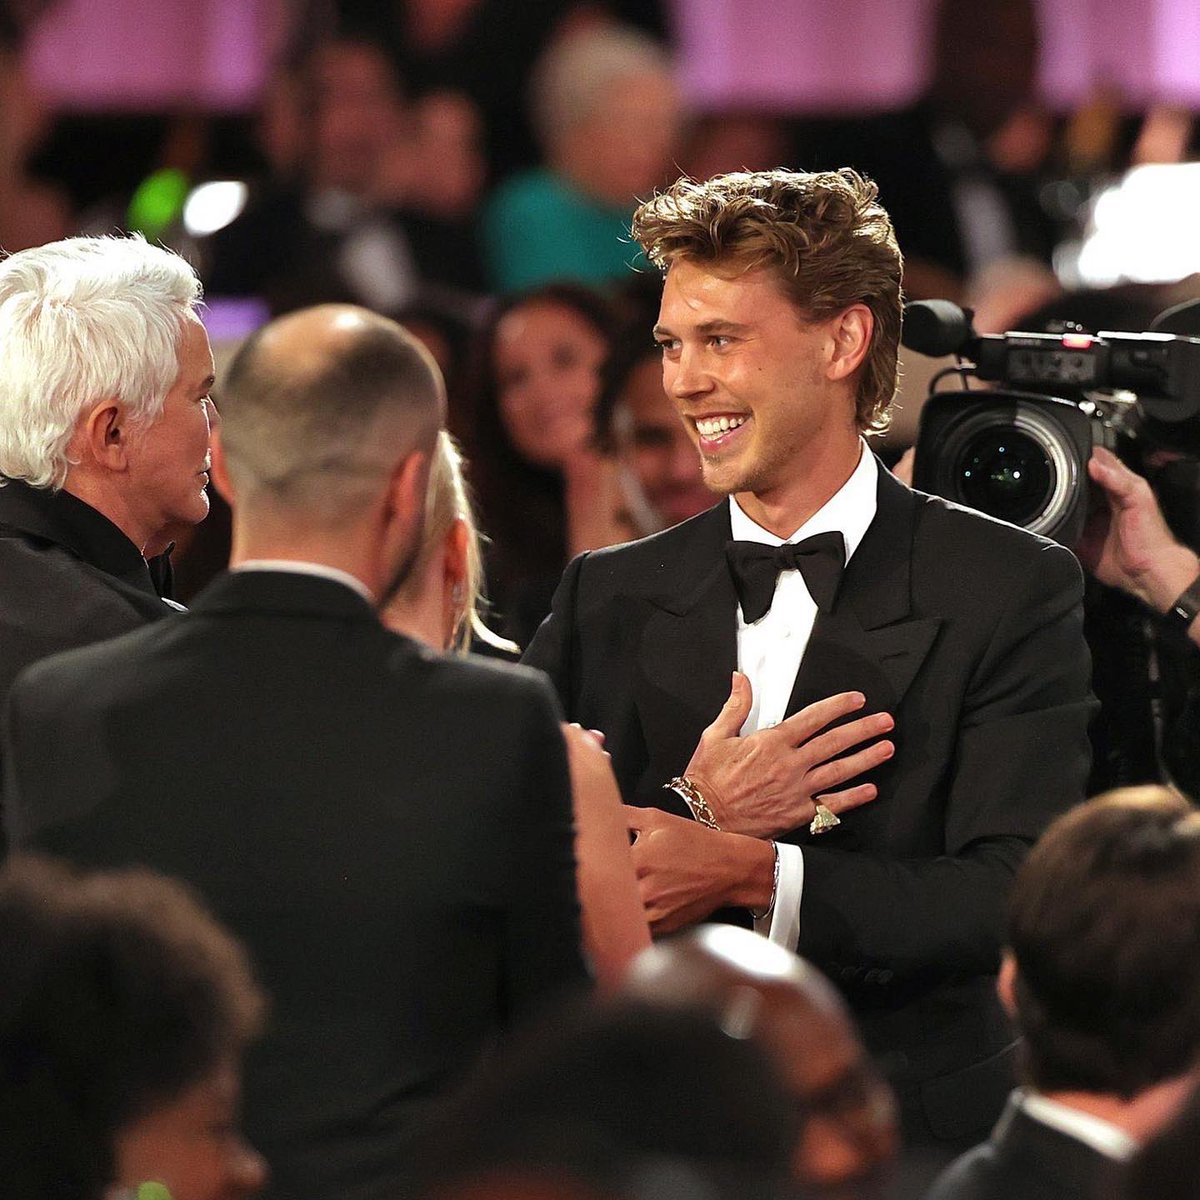 Unbridled joy never looked so good on anyone as it did on #austinbutler at the #goldenglobes2023.